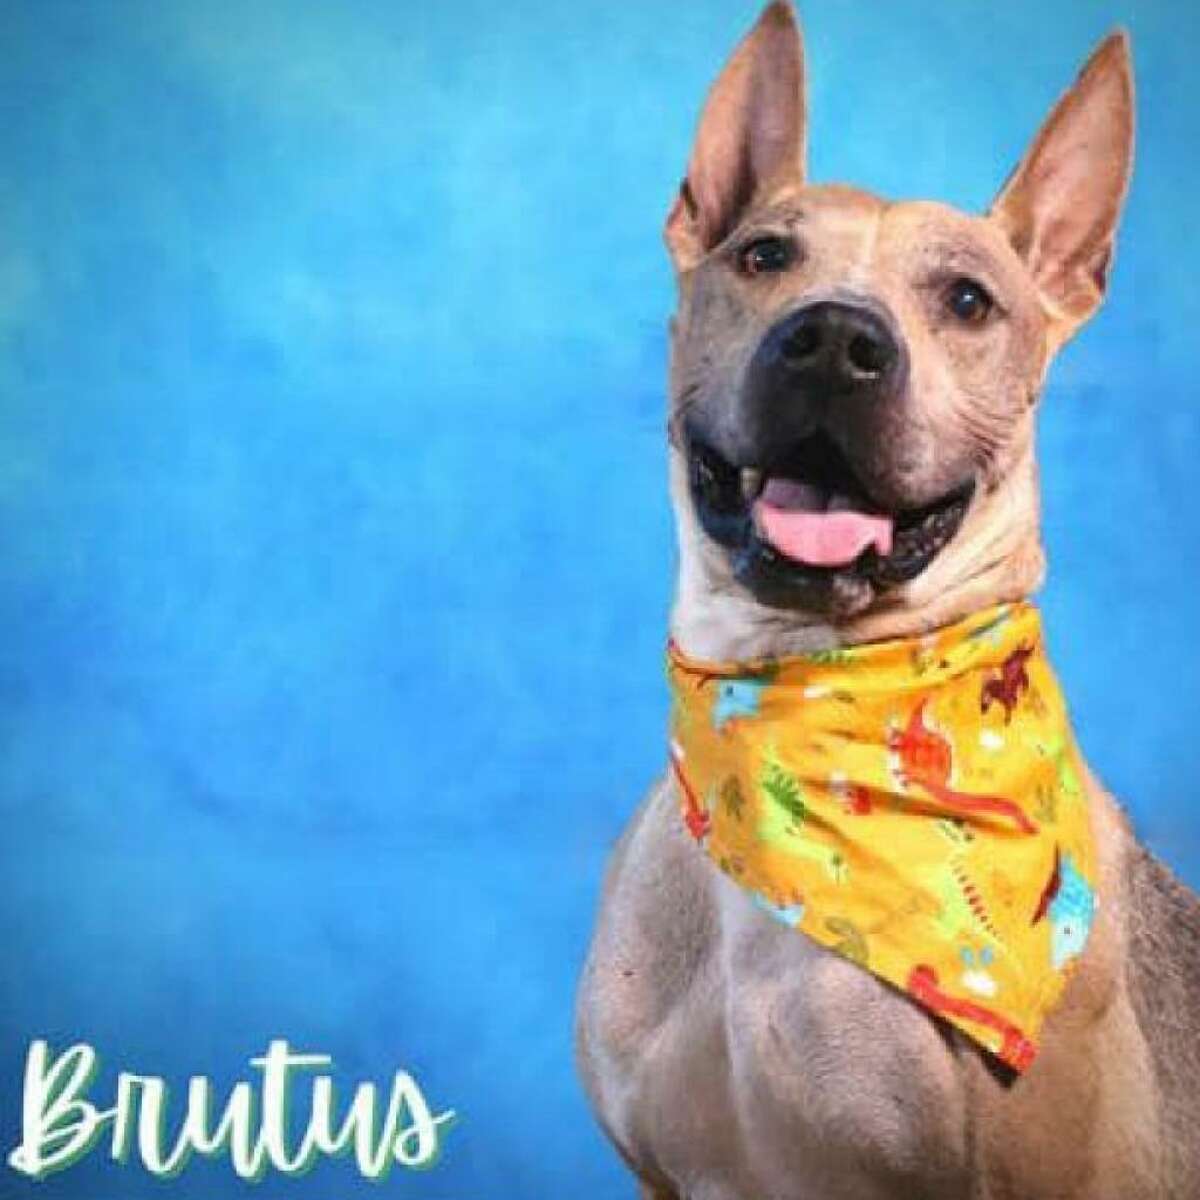 Brutus' head shot that he used to land gigs in Hollywood. You may remember him from his time on the HBO TV series Entourage   